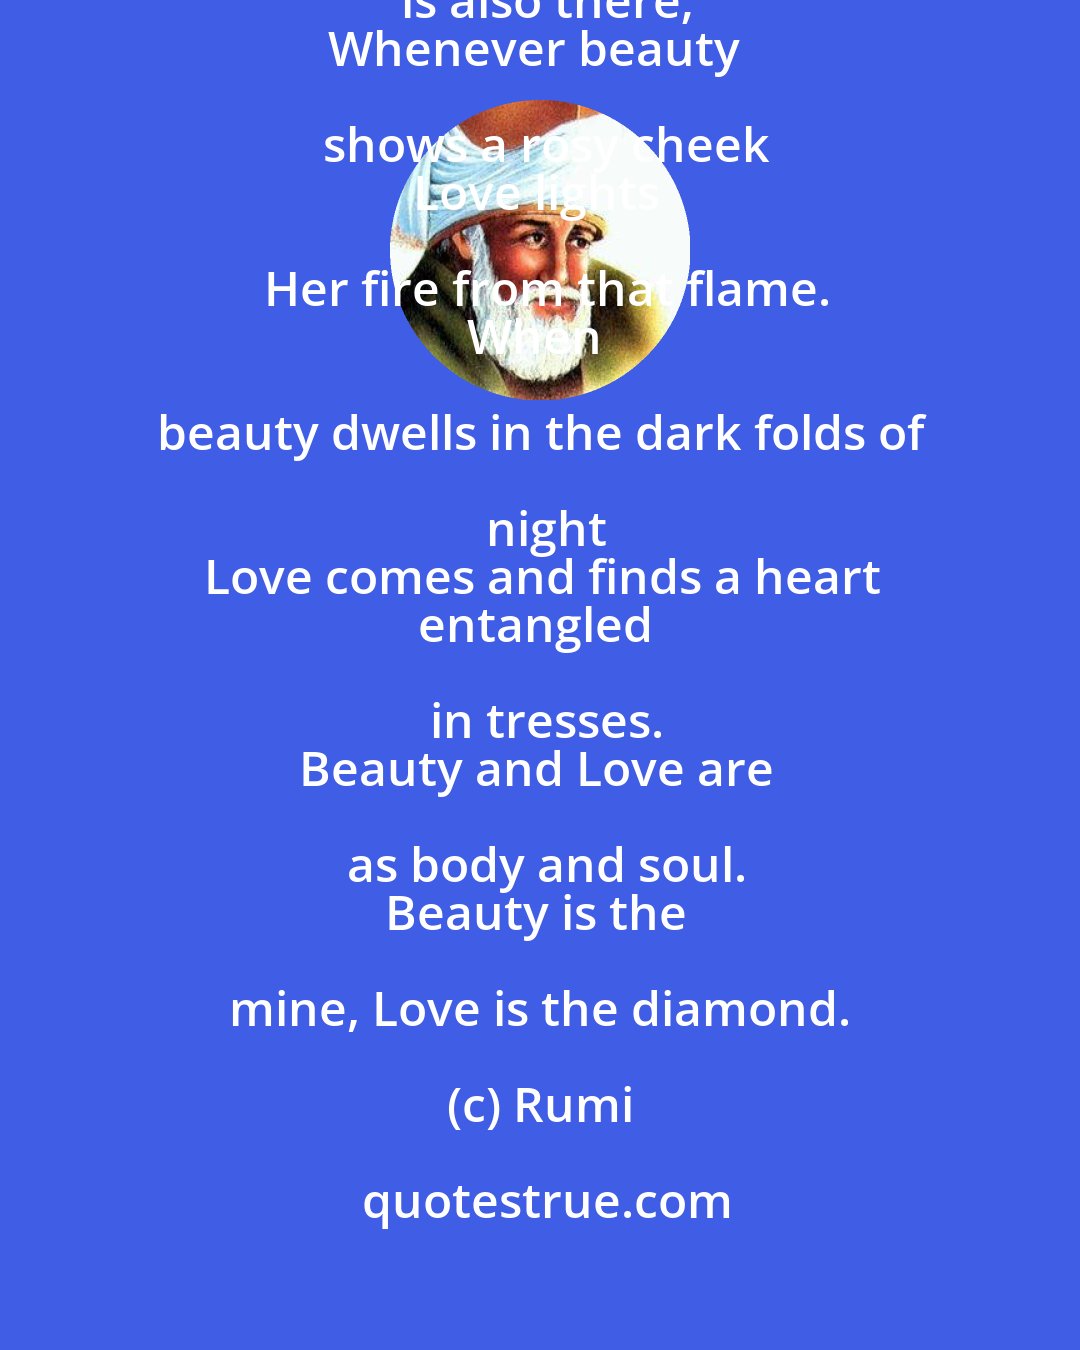 Rumi: Whenever Beauty looks,
Love is also there;
Whenever beauty shows a rosy cheek
Love lights Her fire from that flame.
When beauty dwells in the dark folds of night
Love comes and finds a heart
entangled in tresses.
Beauty and Love are as body and soul.
Beauty is the mine, Love is the diamond.